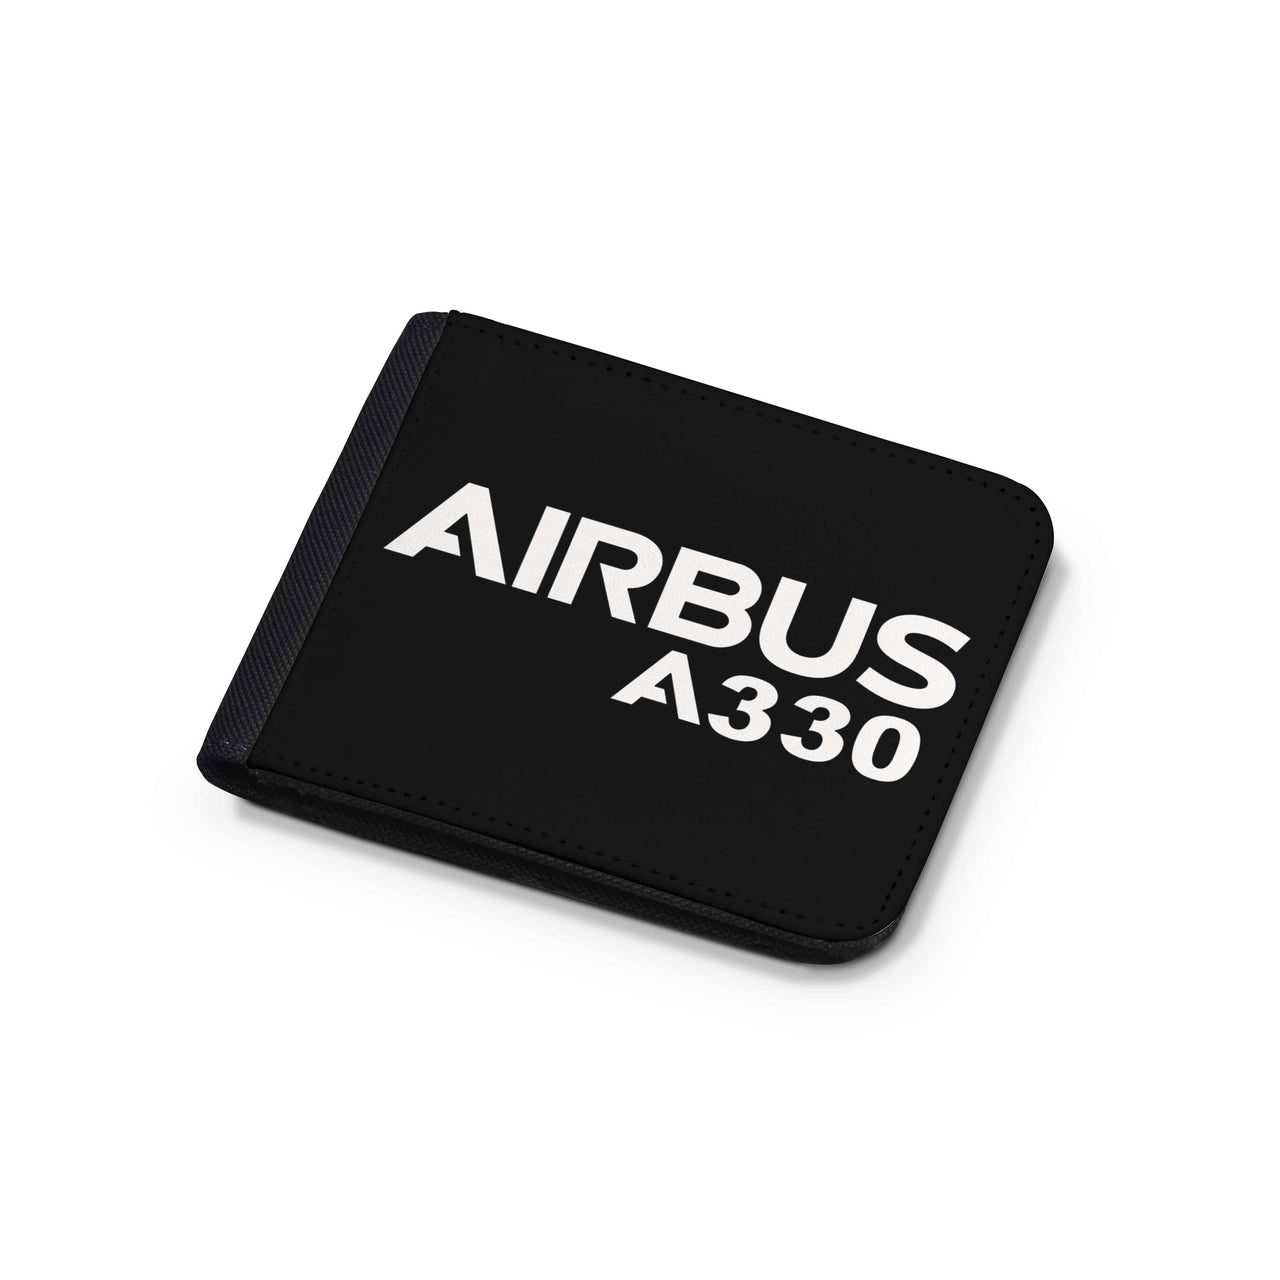 Airbus A330 & Text Designed Wallets